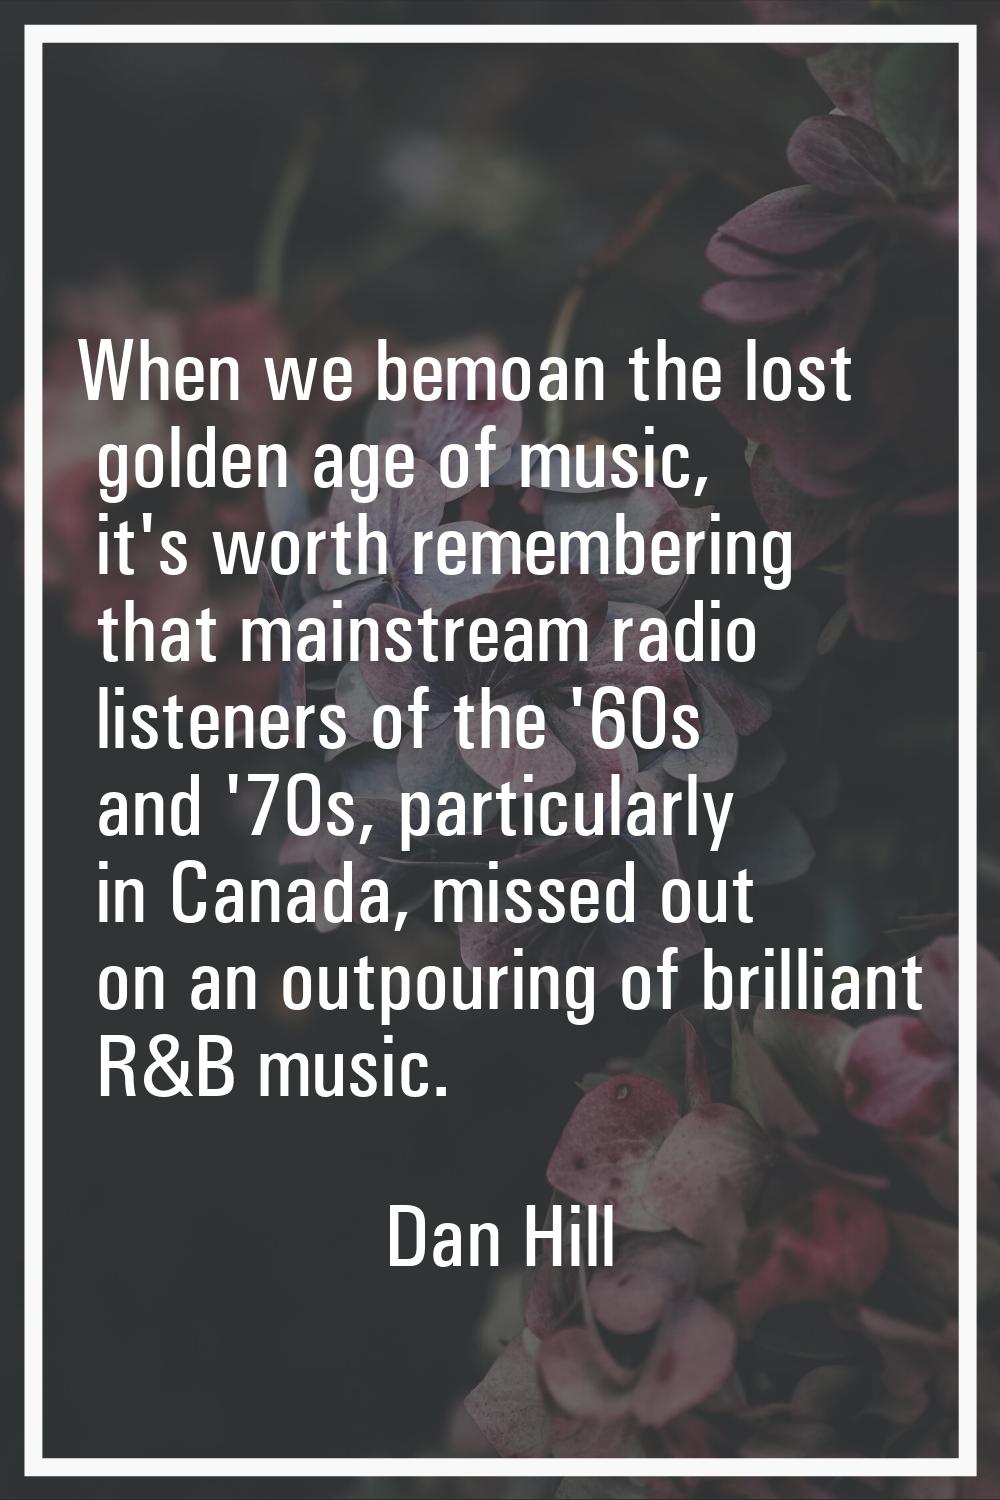 When we bemoan the lost golden age of music, it's worth remembering that mainstream radio listeners